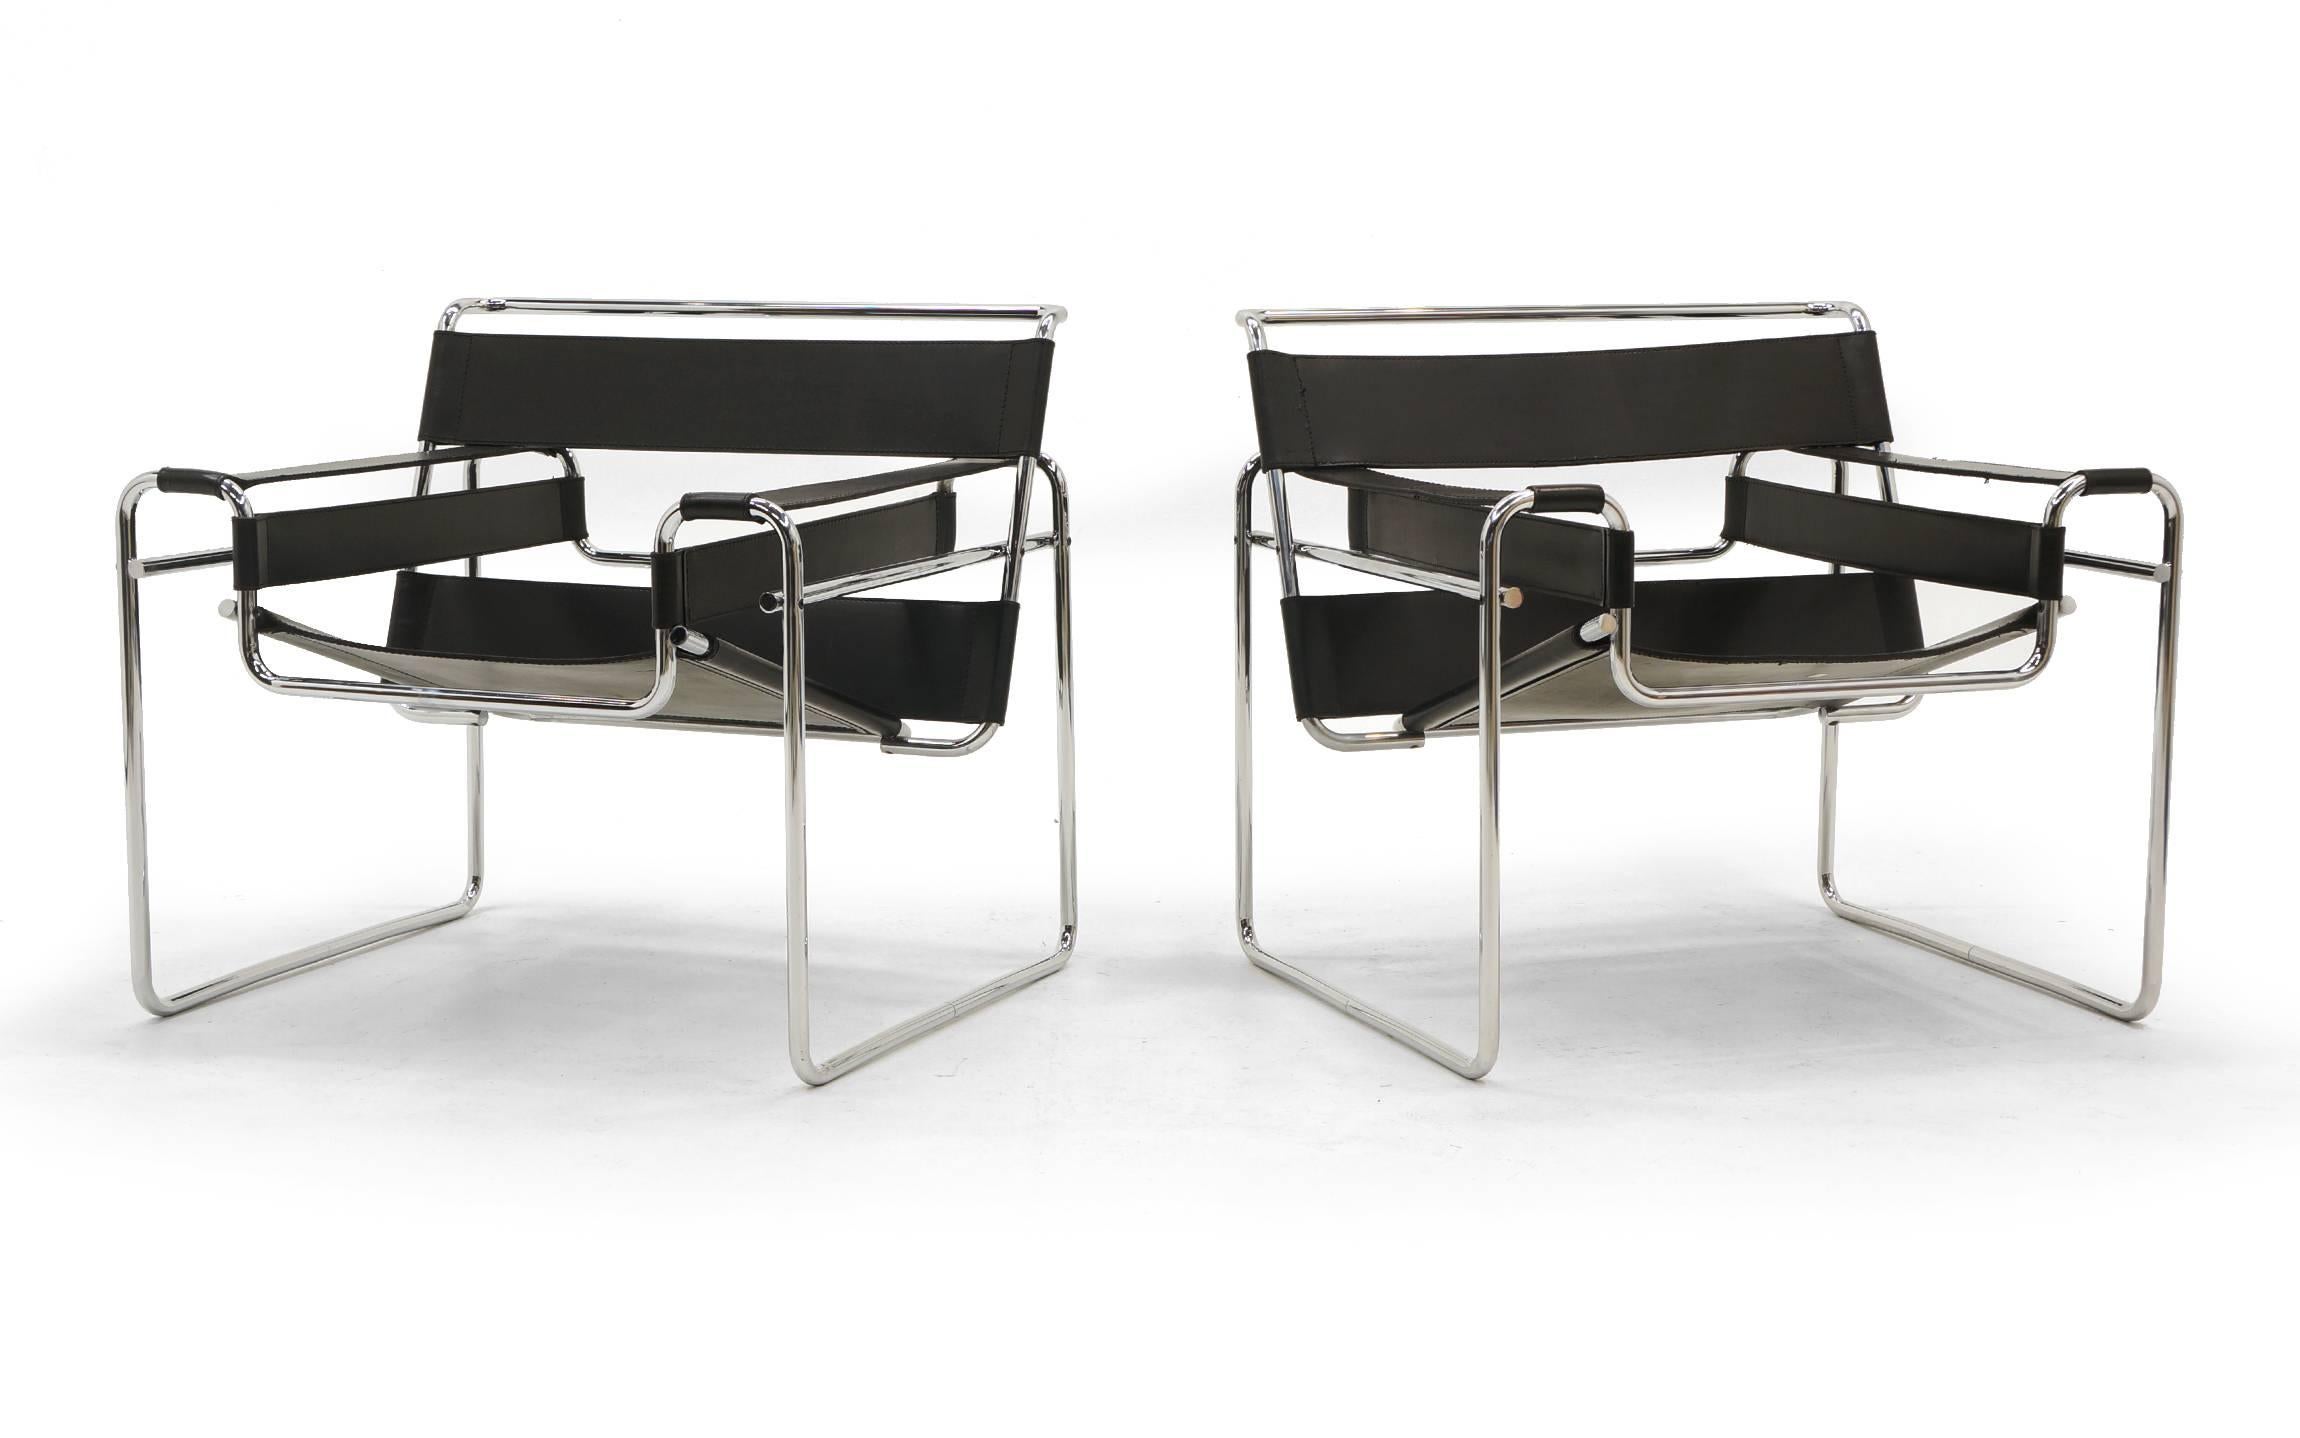 Early pair of authentic Wassily chairs designed by Marcel Breuer and made by Knoll. A true timeless Bauhaus design. One chair retains its early Knoll label. One chair shows what appears to be a very small repairs to a seam, other than that these are